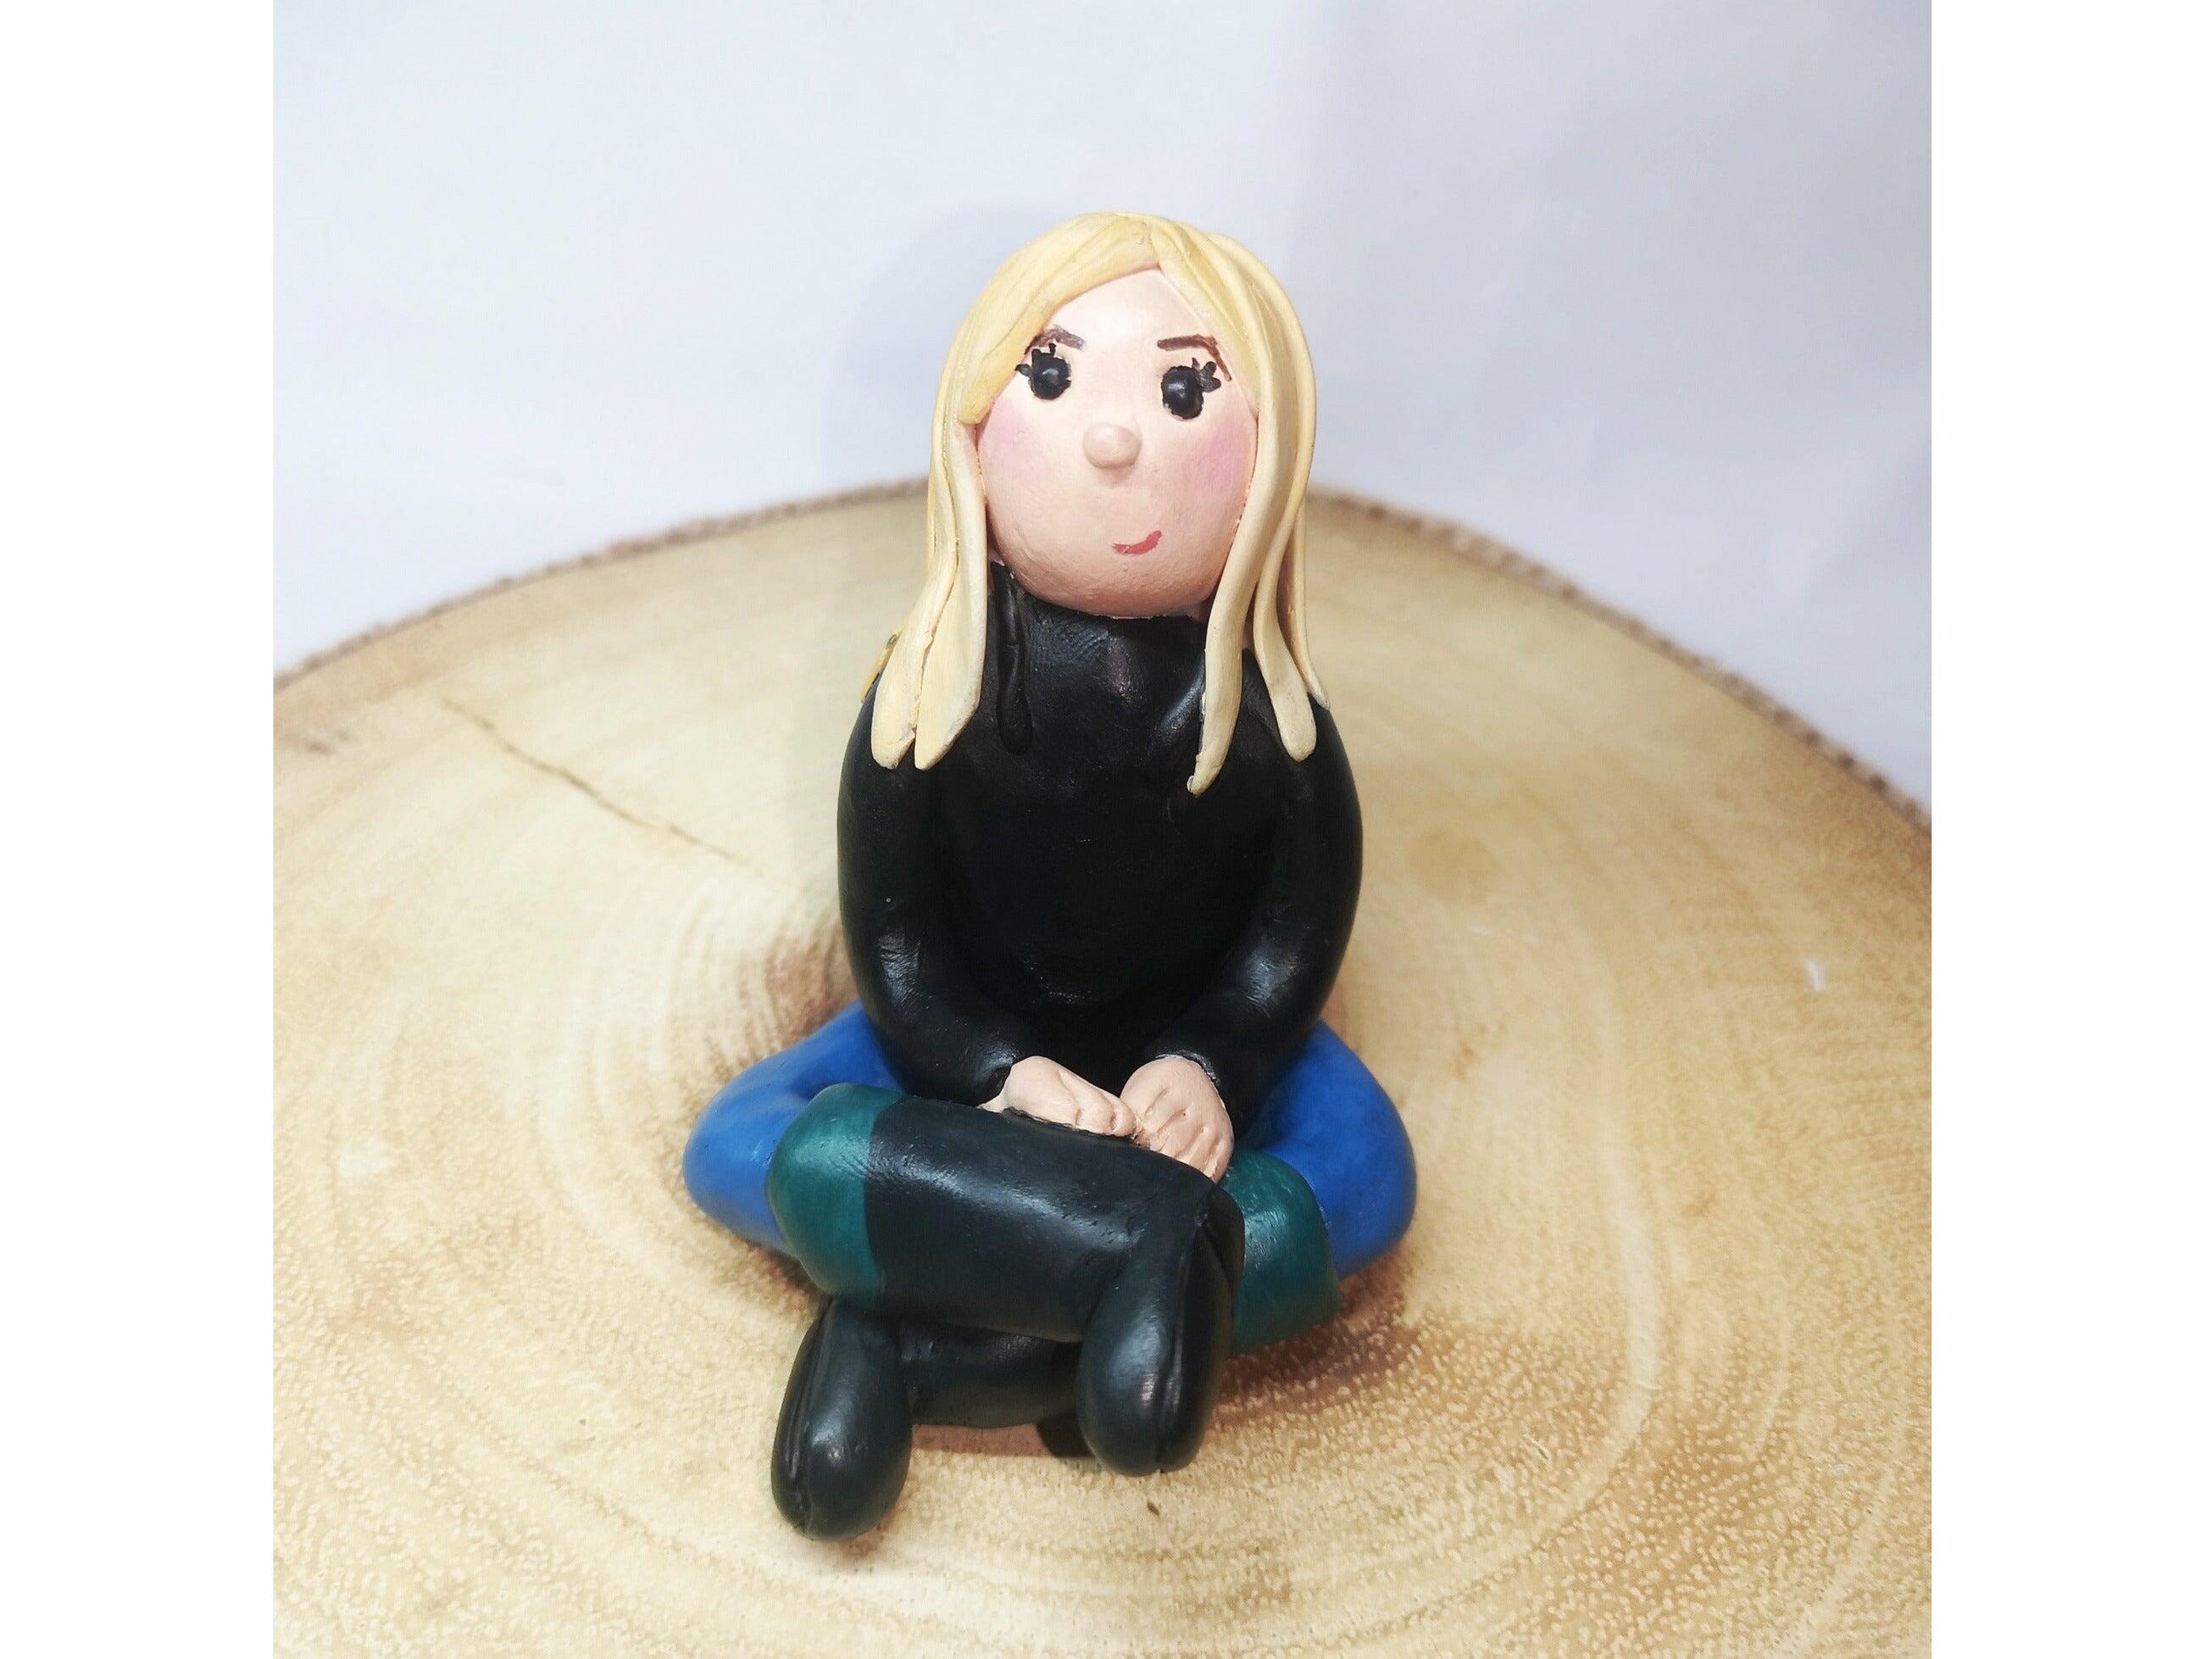 A smiling blonde clay model wearing wellington boots